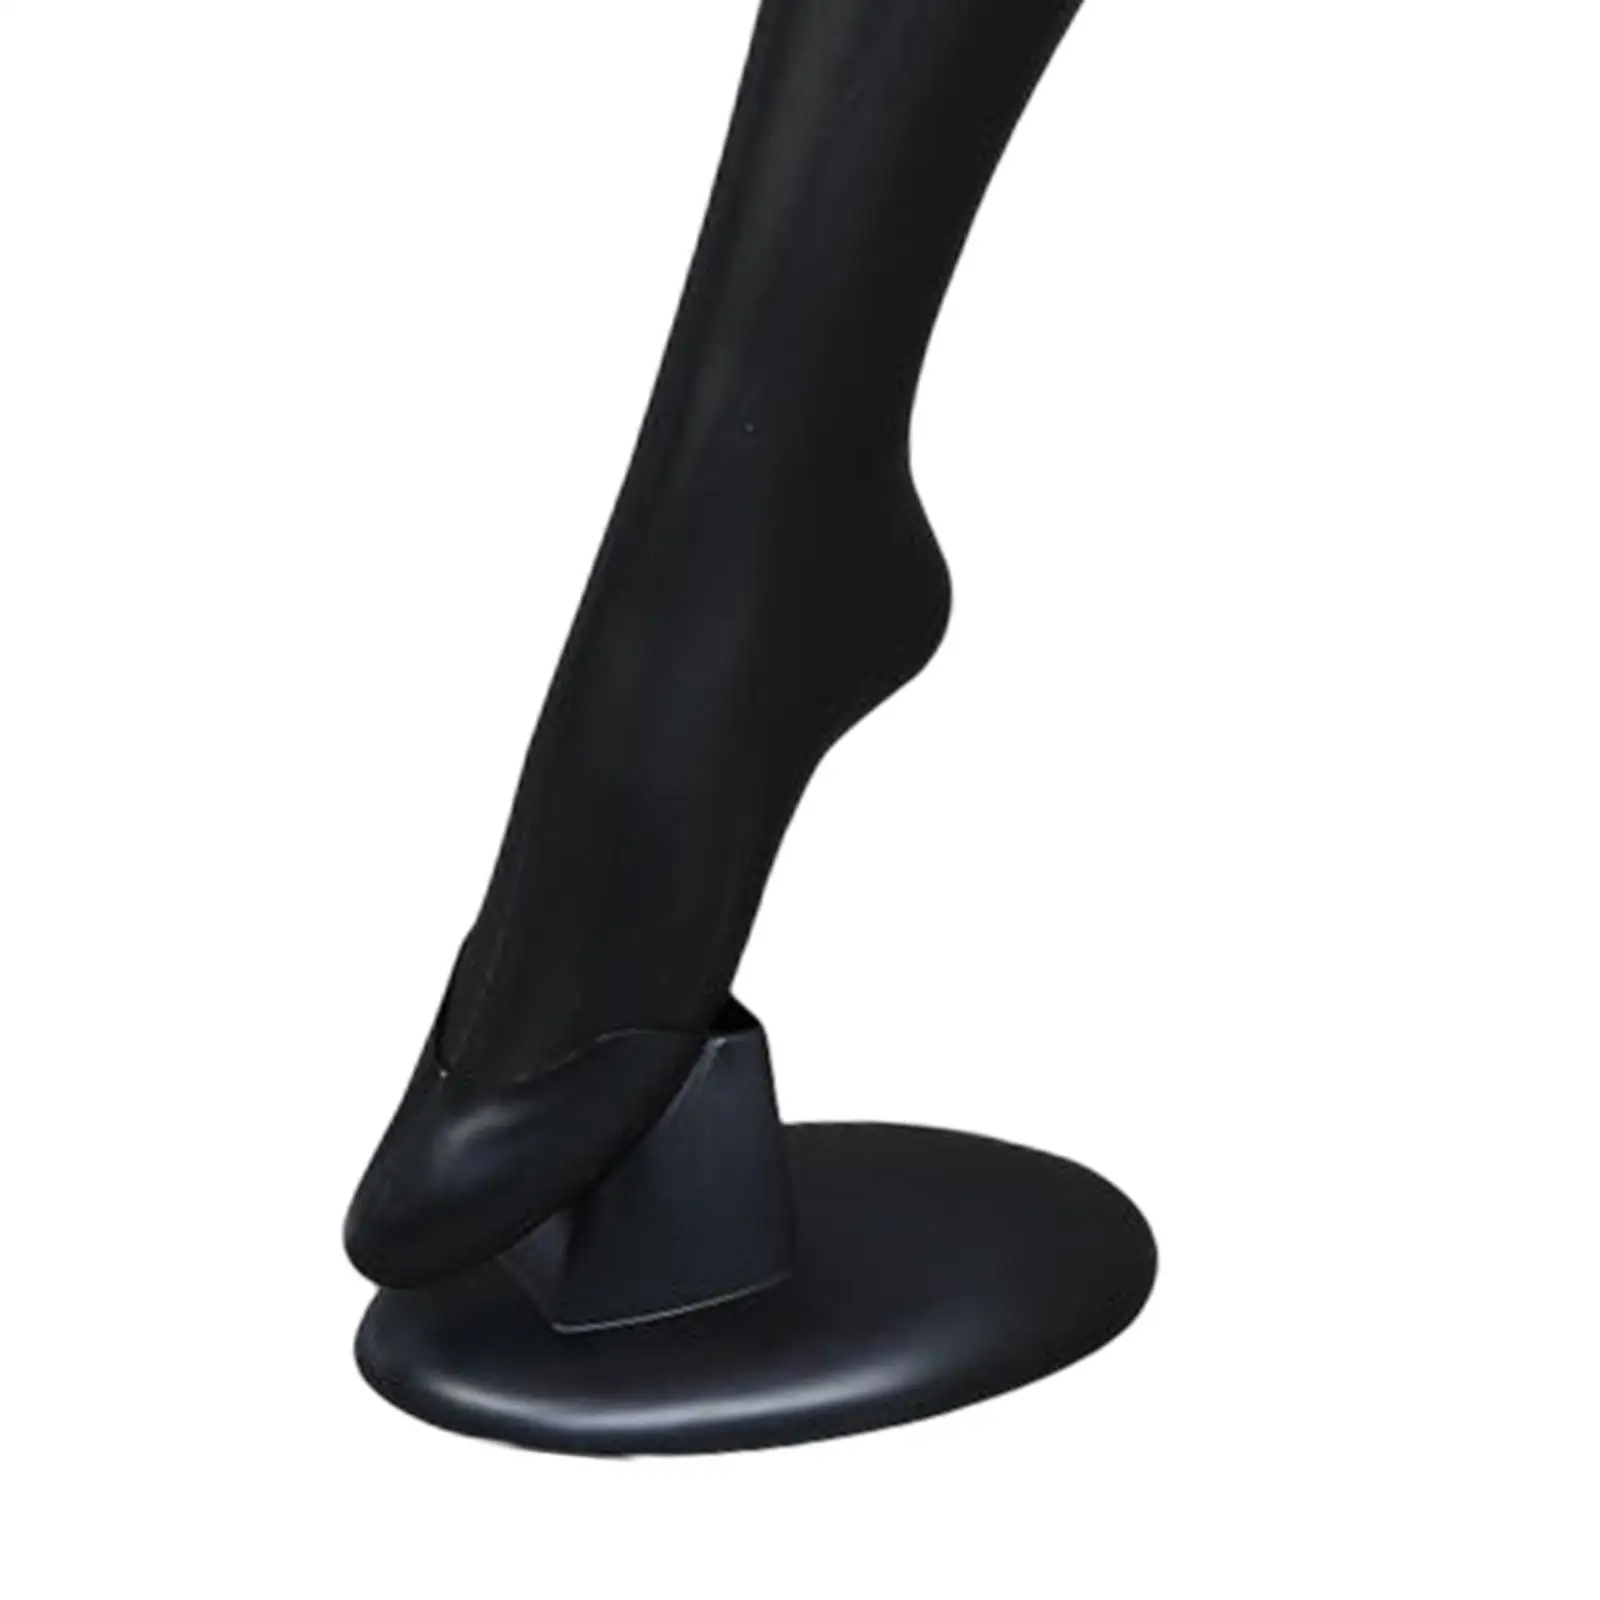 Female Mannequin Leg with Base Display Socks Tool Trouser Silk Stockings Leggings Display Mould for Pantyhose Skirts Jeans Shop